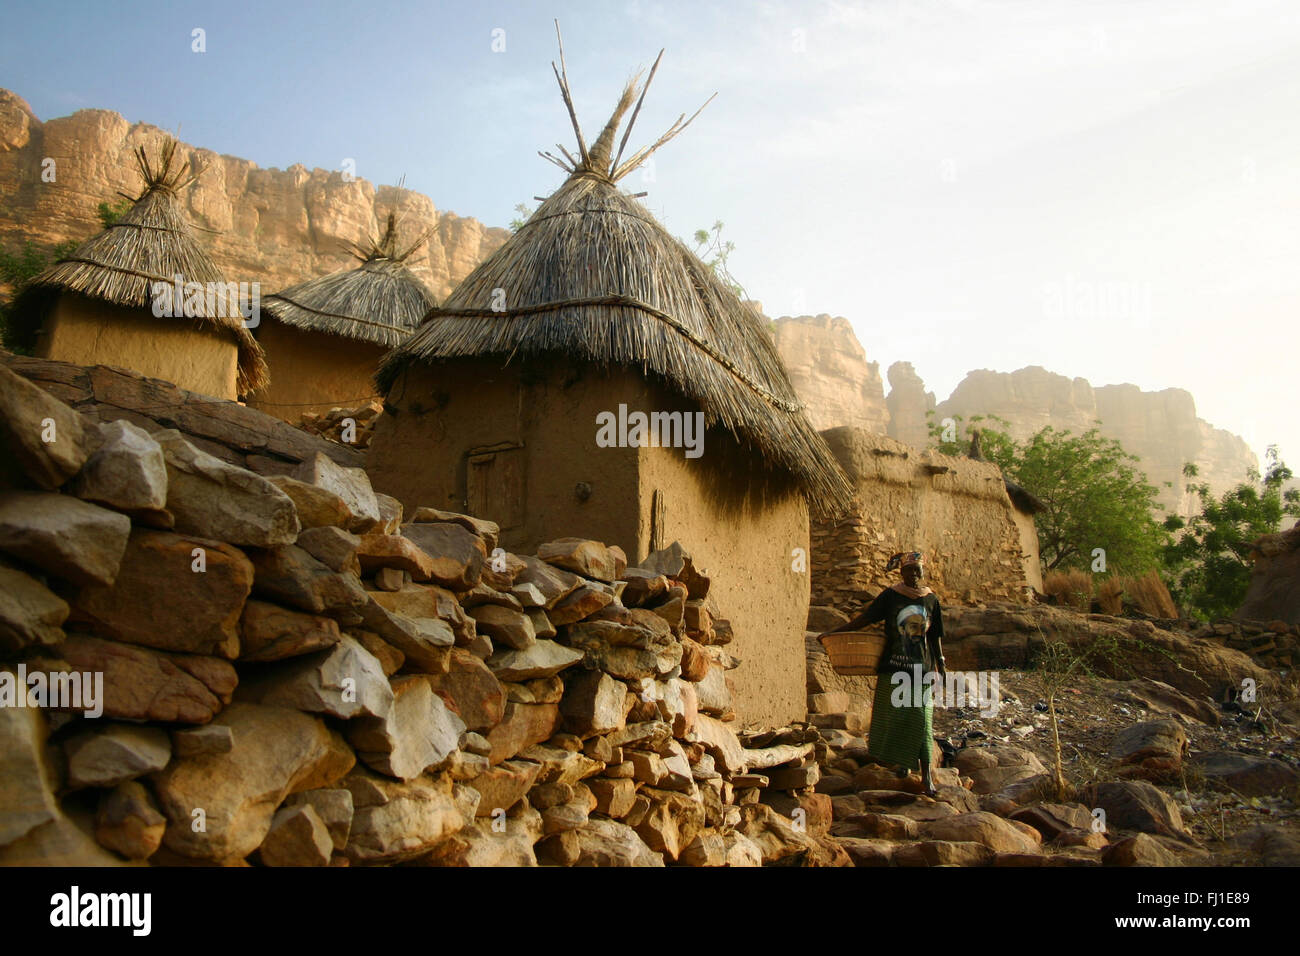 Village and landscape of the Dogon country along the cliff of Bandiagara in Mali Stock Photo